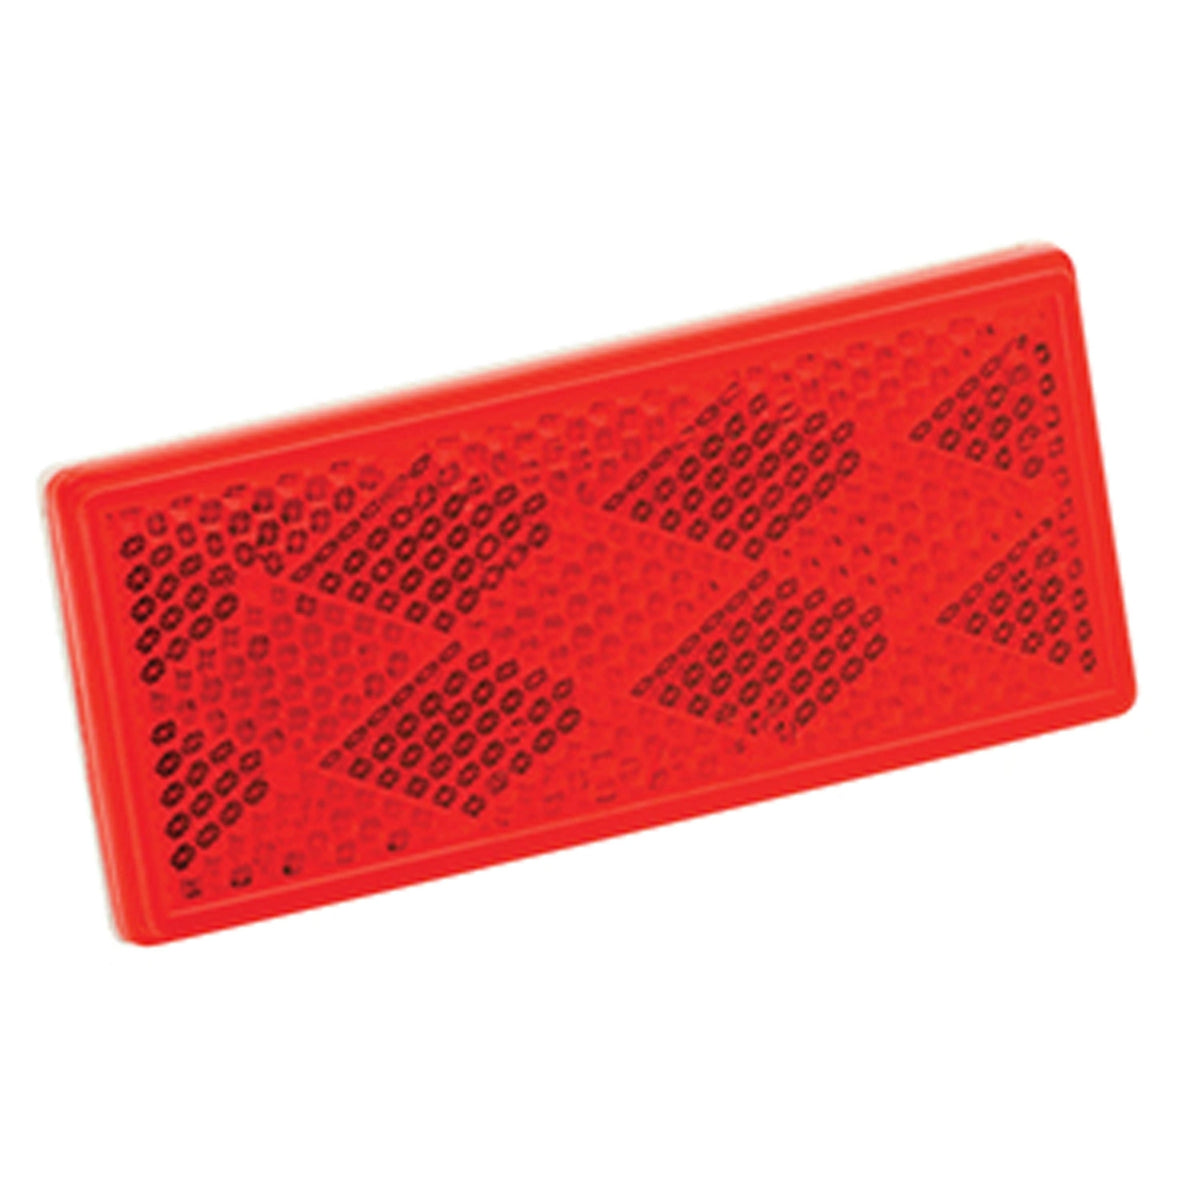 Wesbar Qualifies for Free Shipping Wesbar Rectangular Red Trailer Reflector #003358